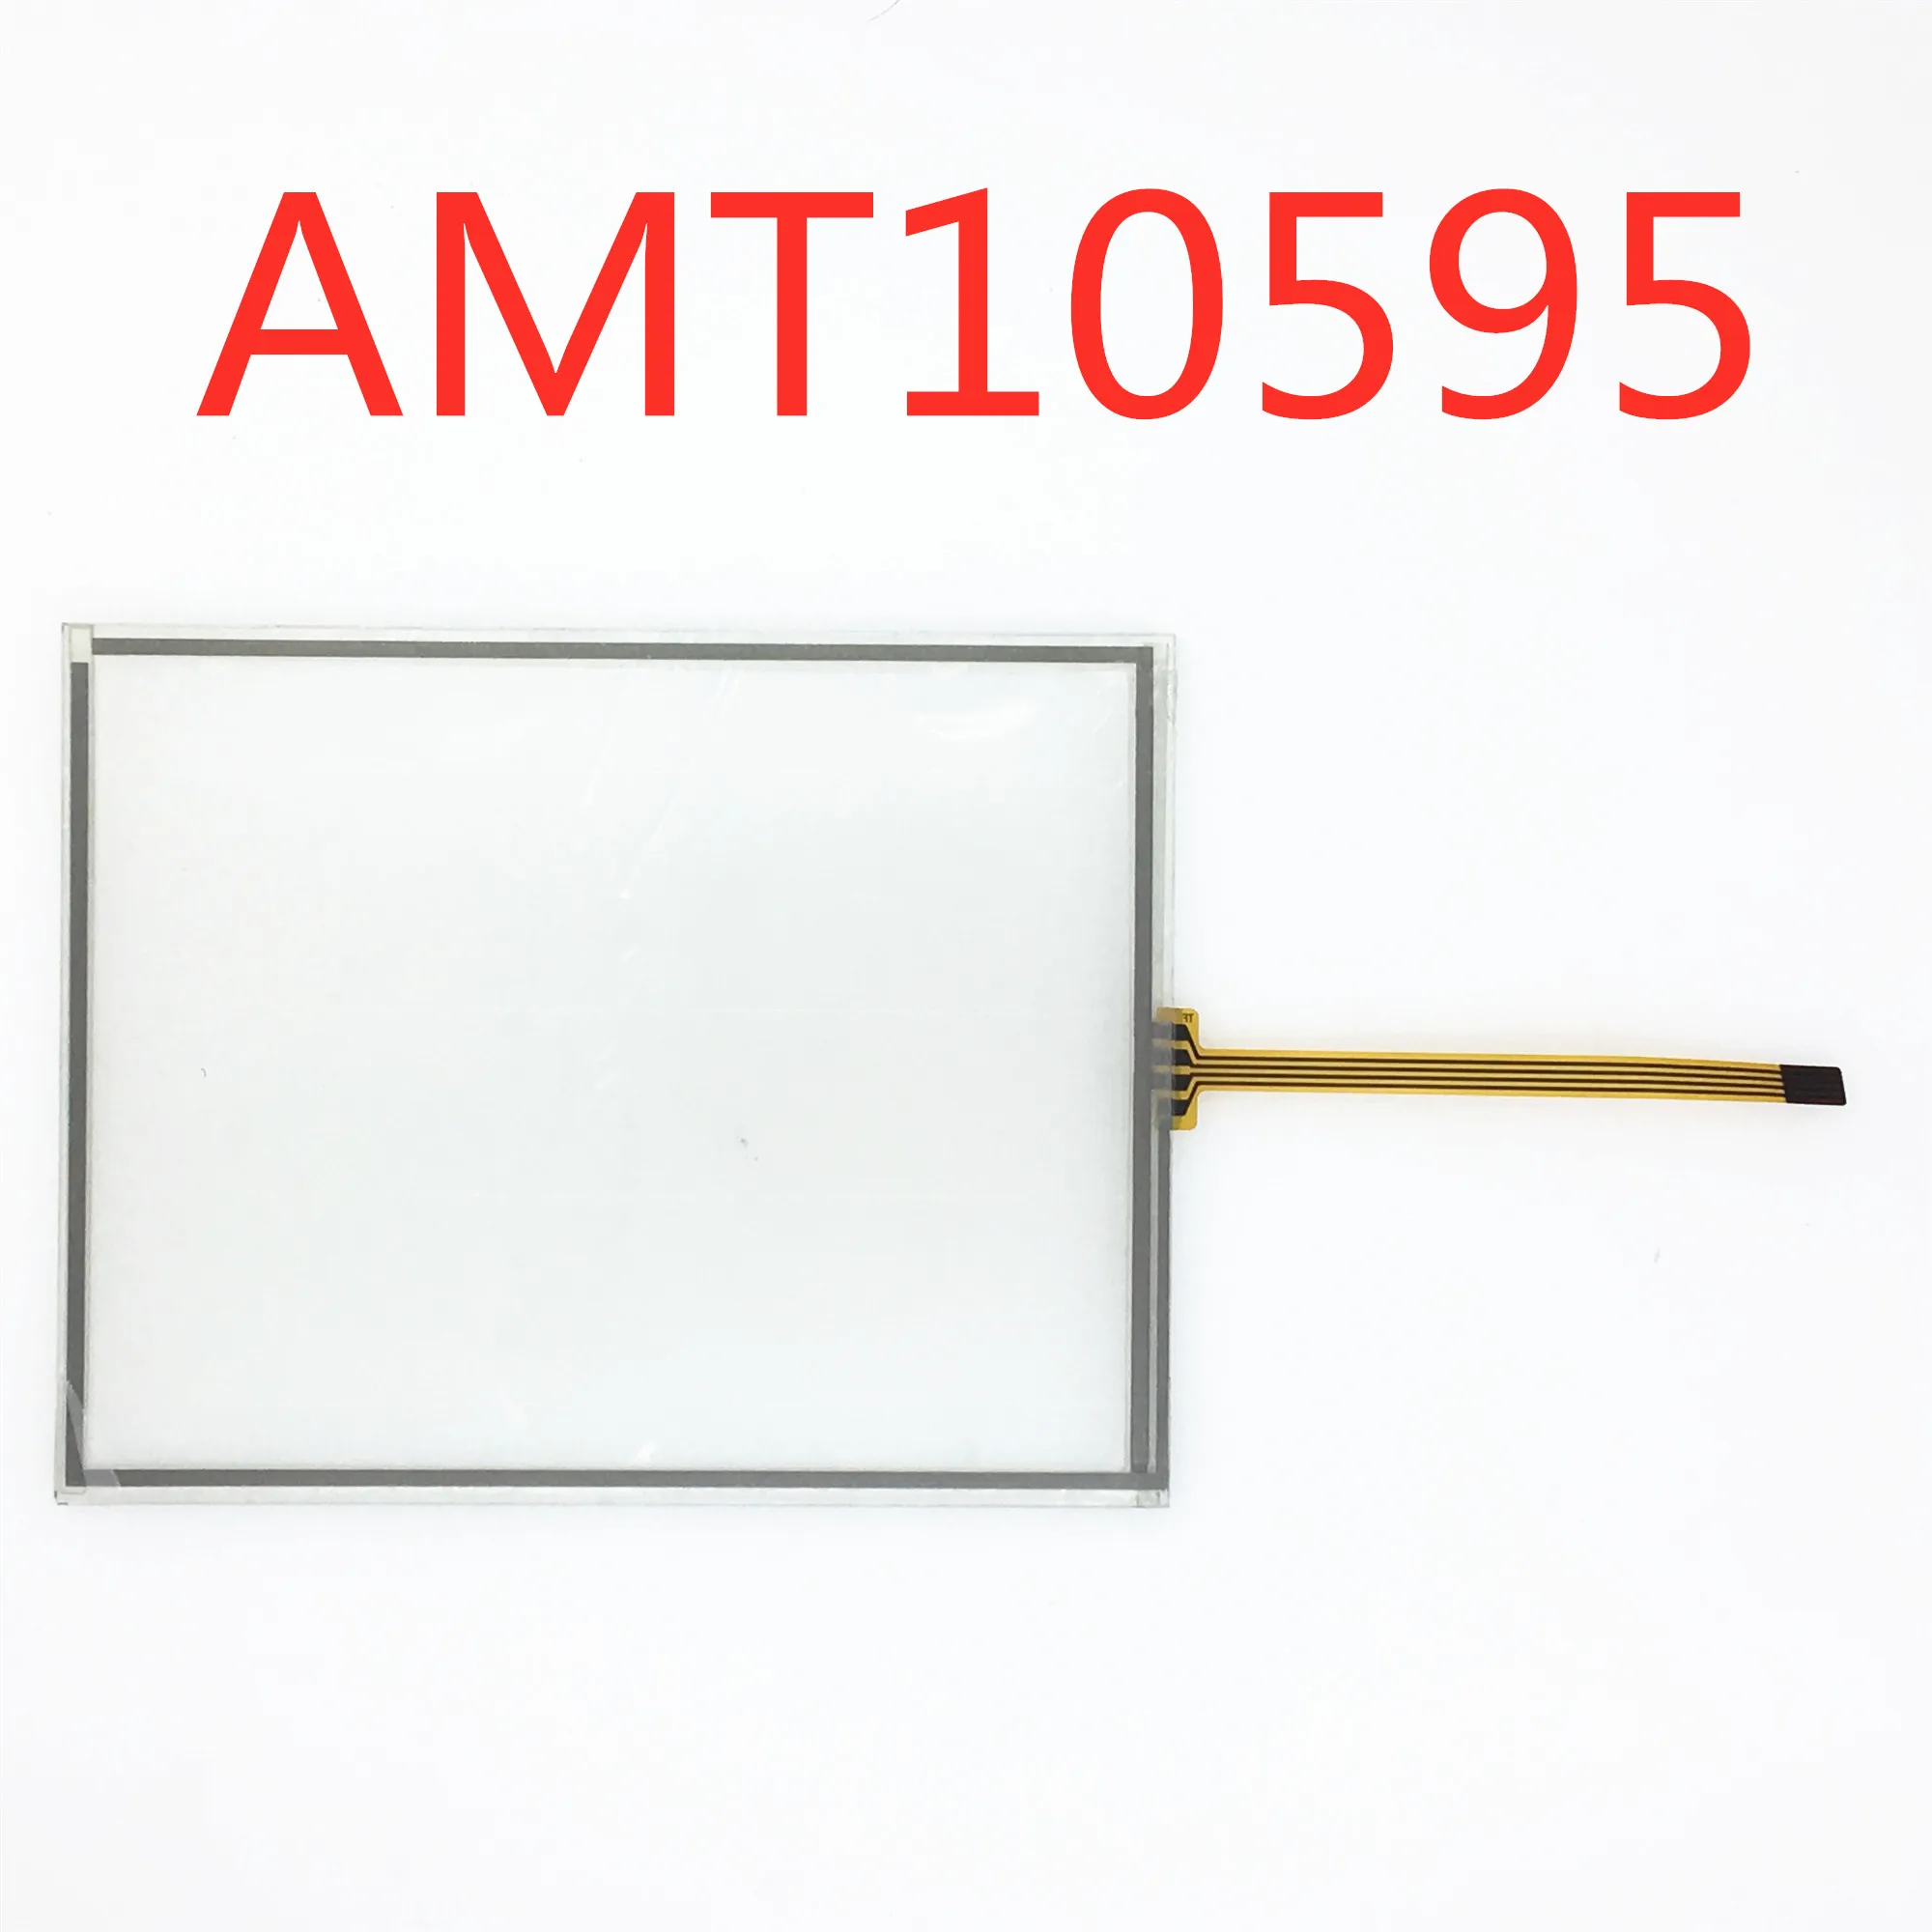 ONE NEW AMT28201,28201000 1071.0092